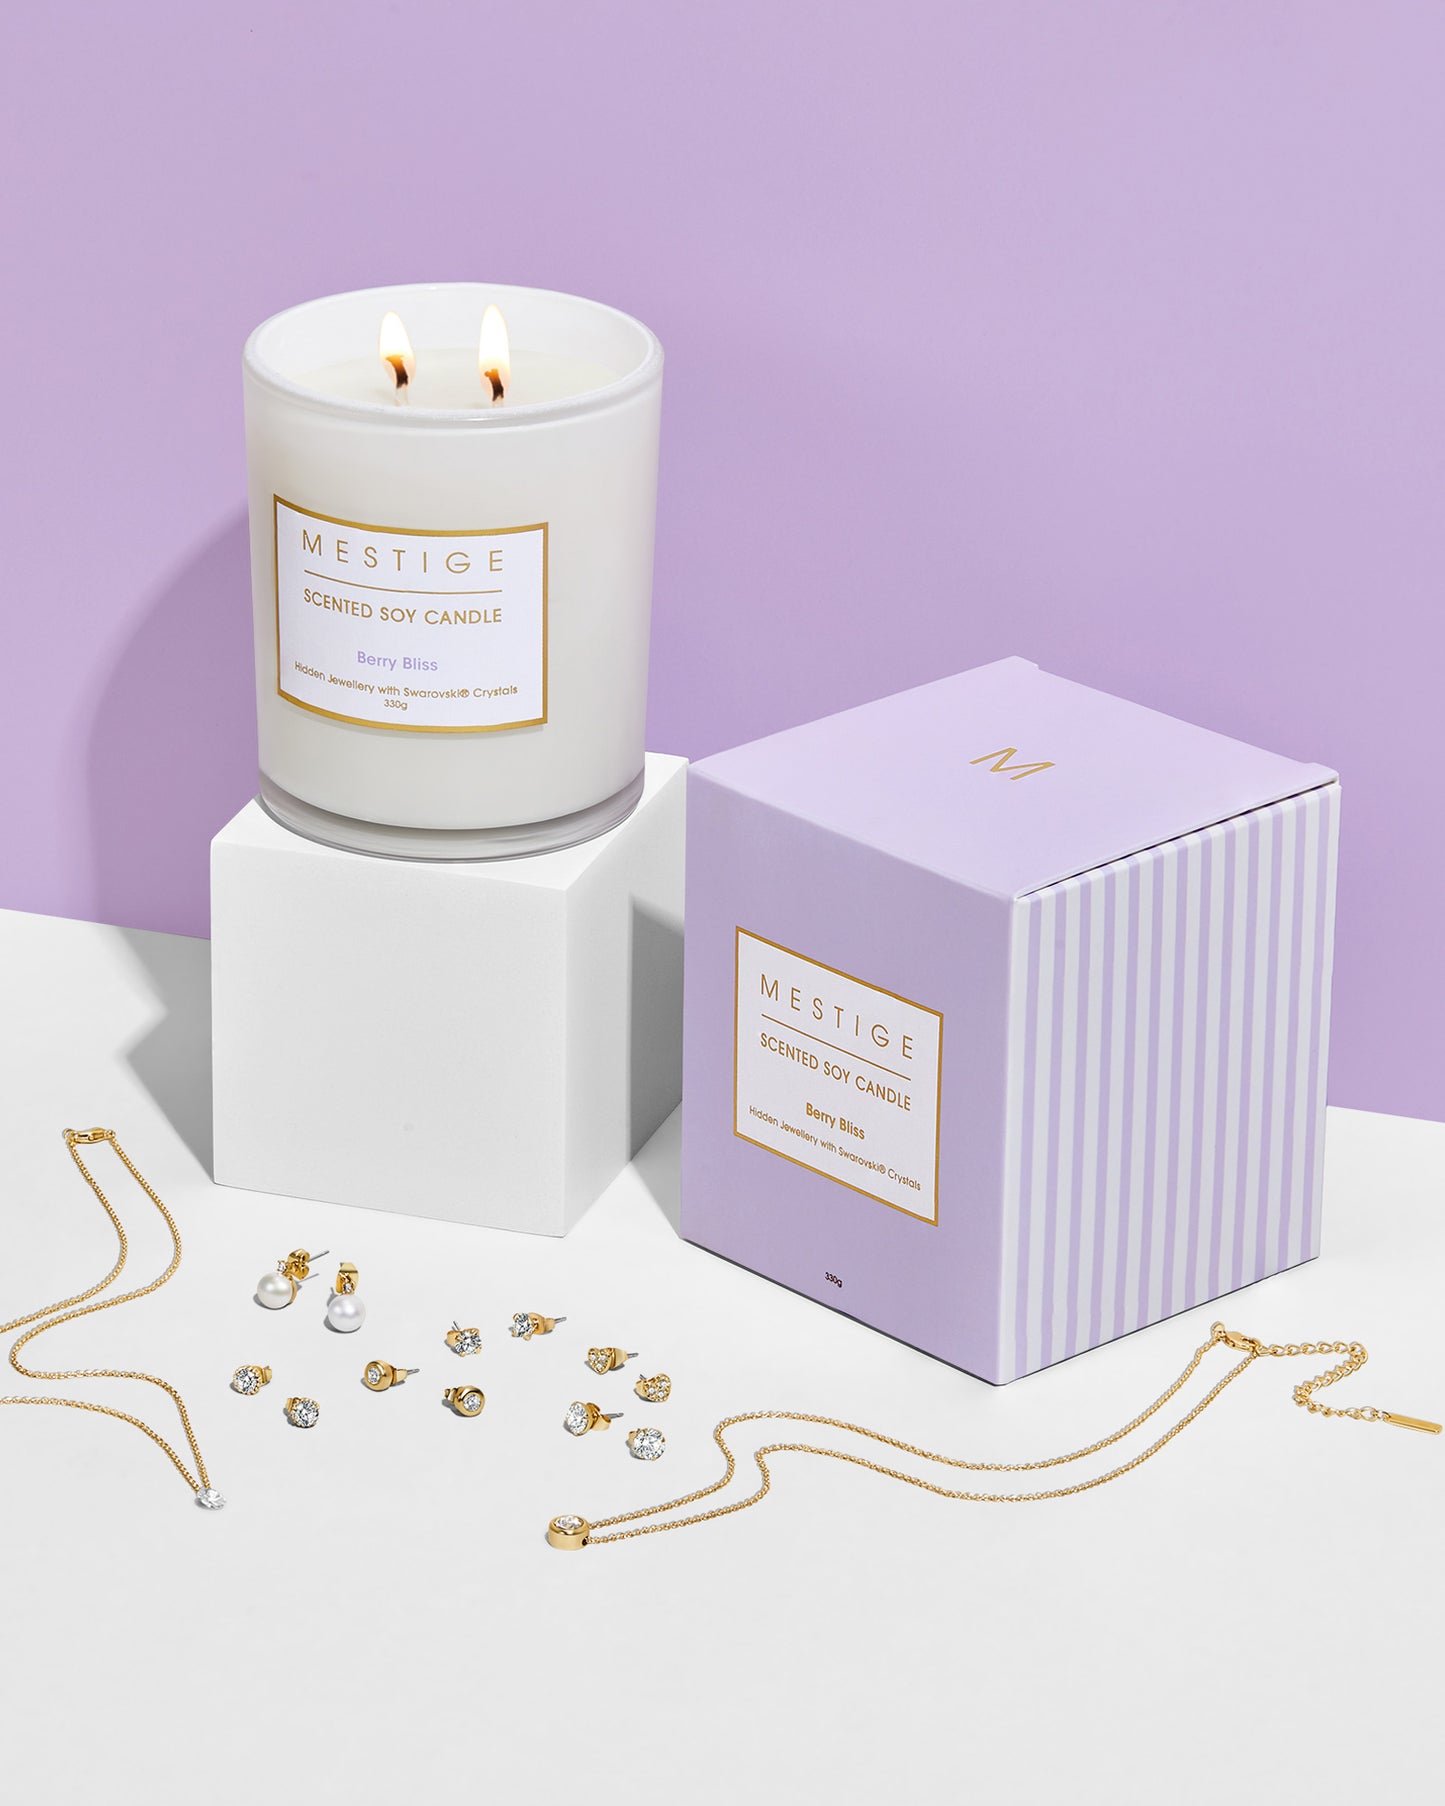 Discover Hidden Surprises in Every Diamond Candle